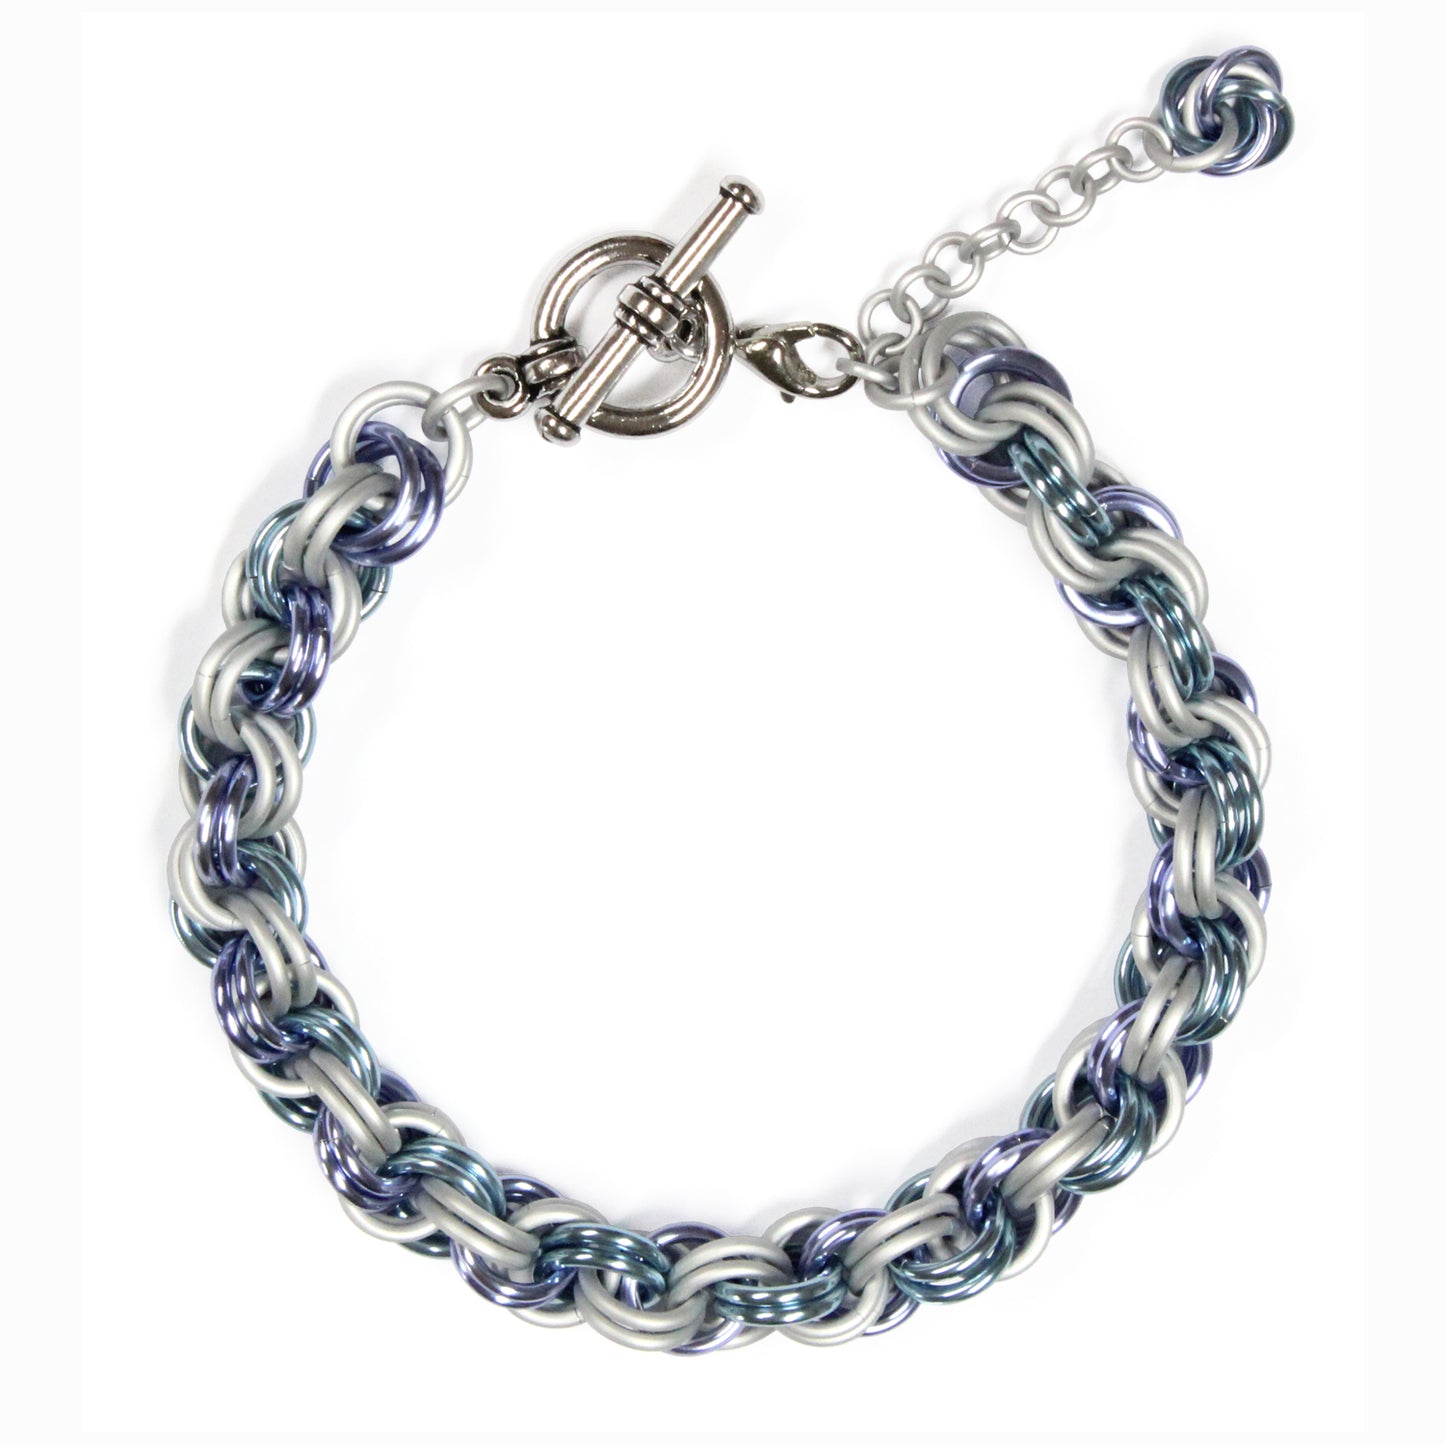 Double Spiral Chainmail Bracelet / sky blue, lavender, matte silver / adjustable clasp for 6.5 to 7.5 inch wrist